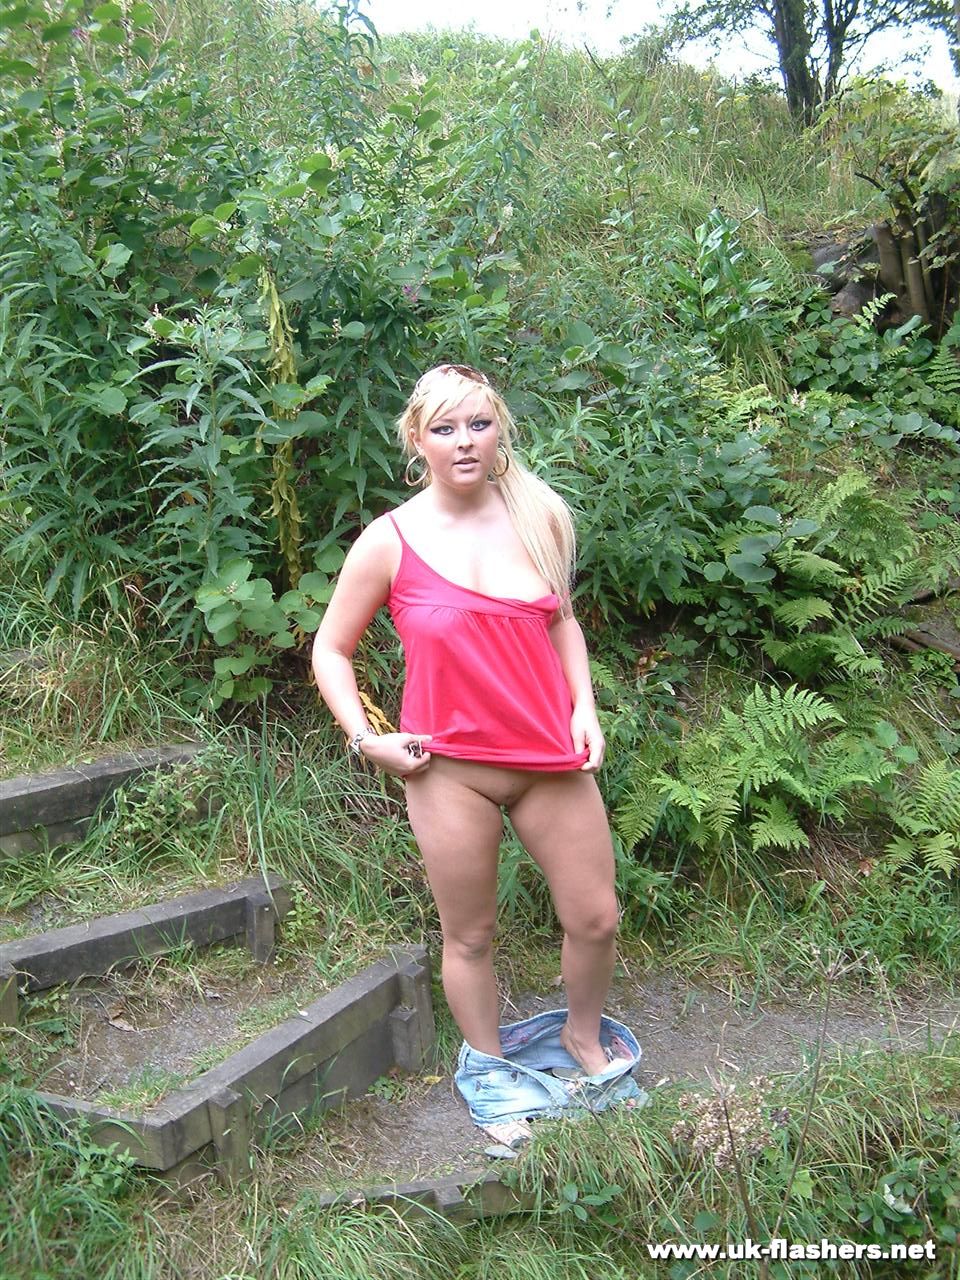 Overweight UK female with blonde hair strips naked on a popular walking trails porno fotky #428197332